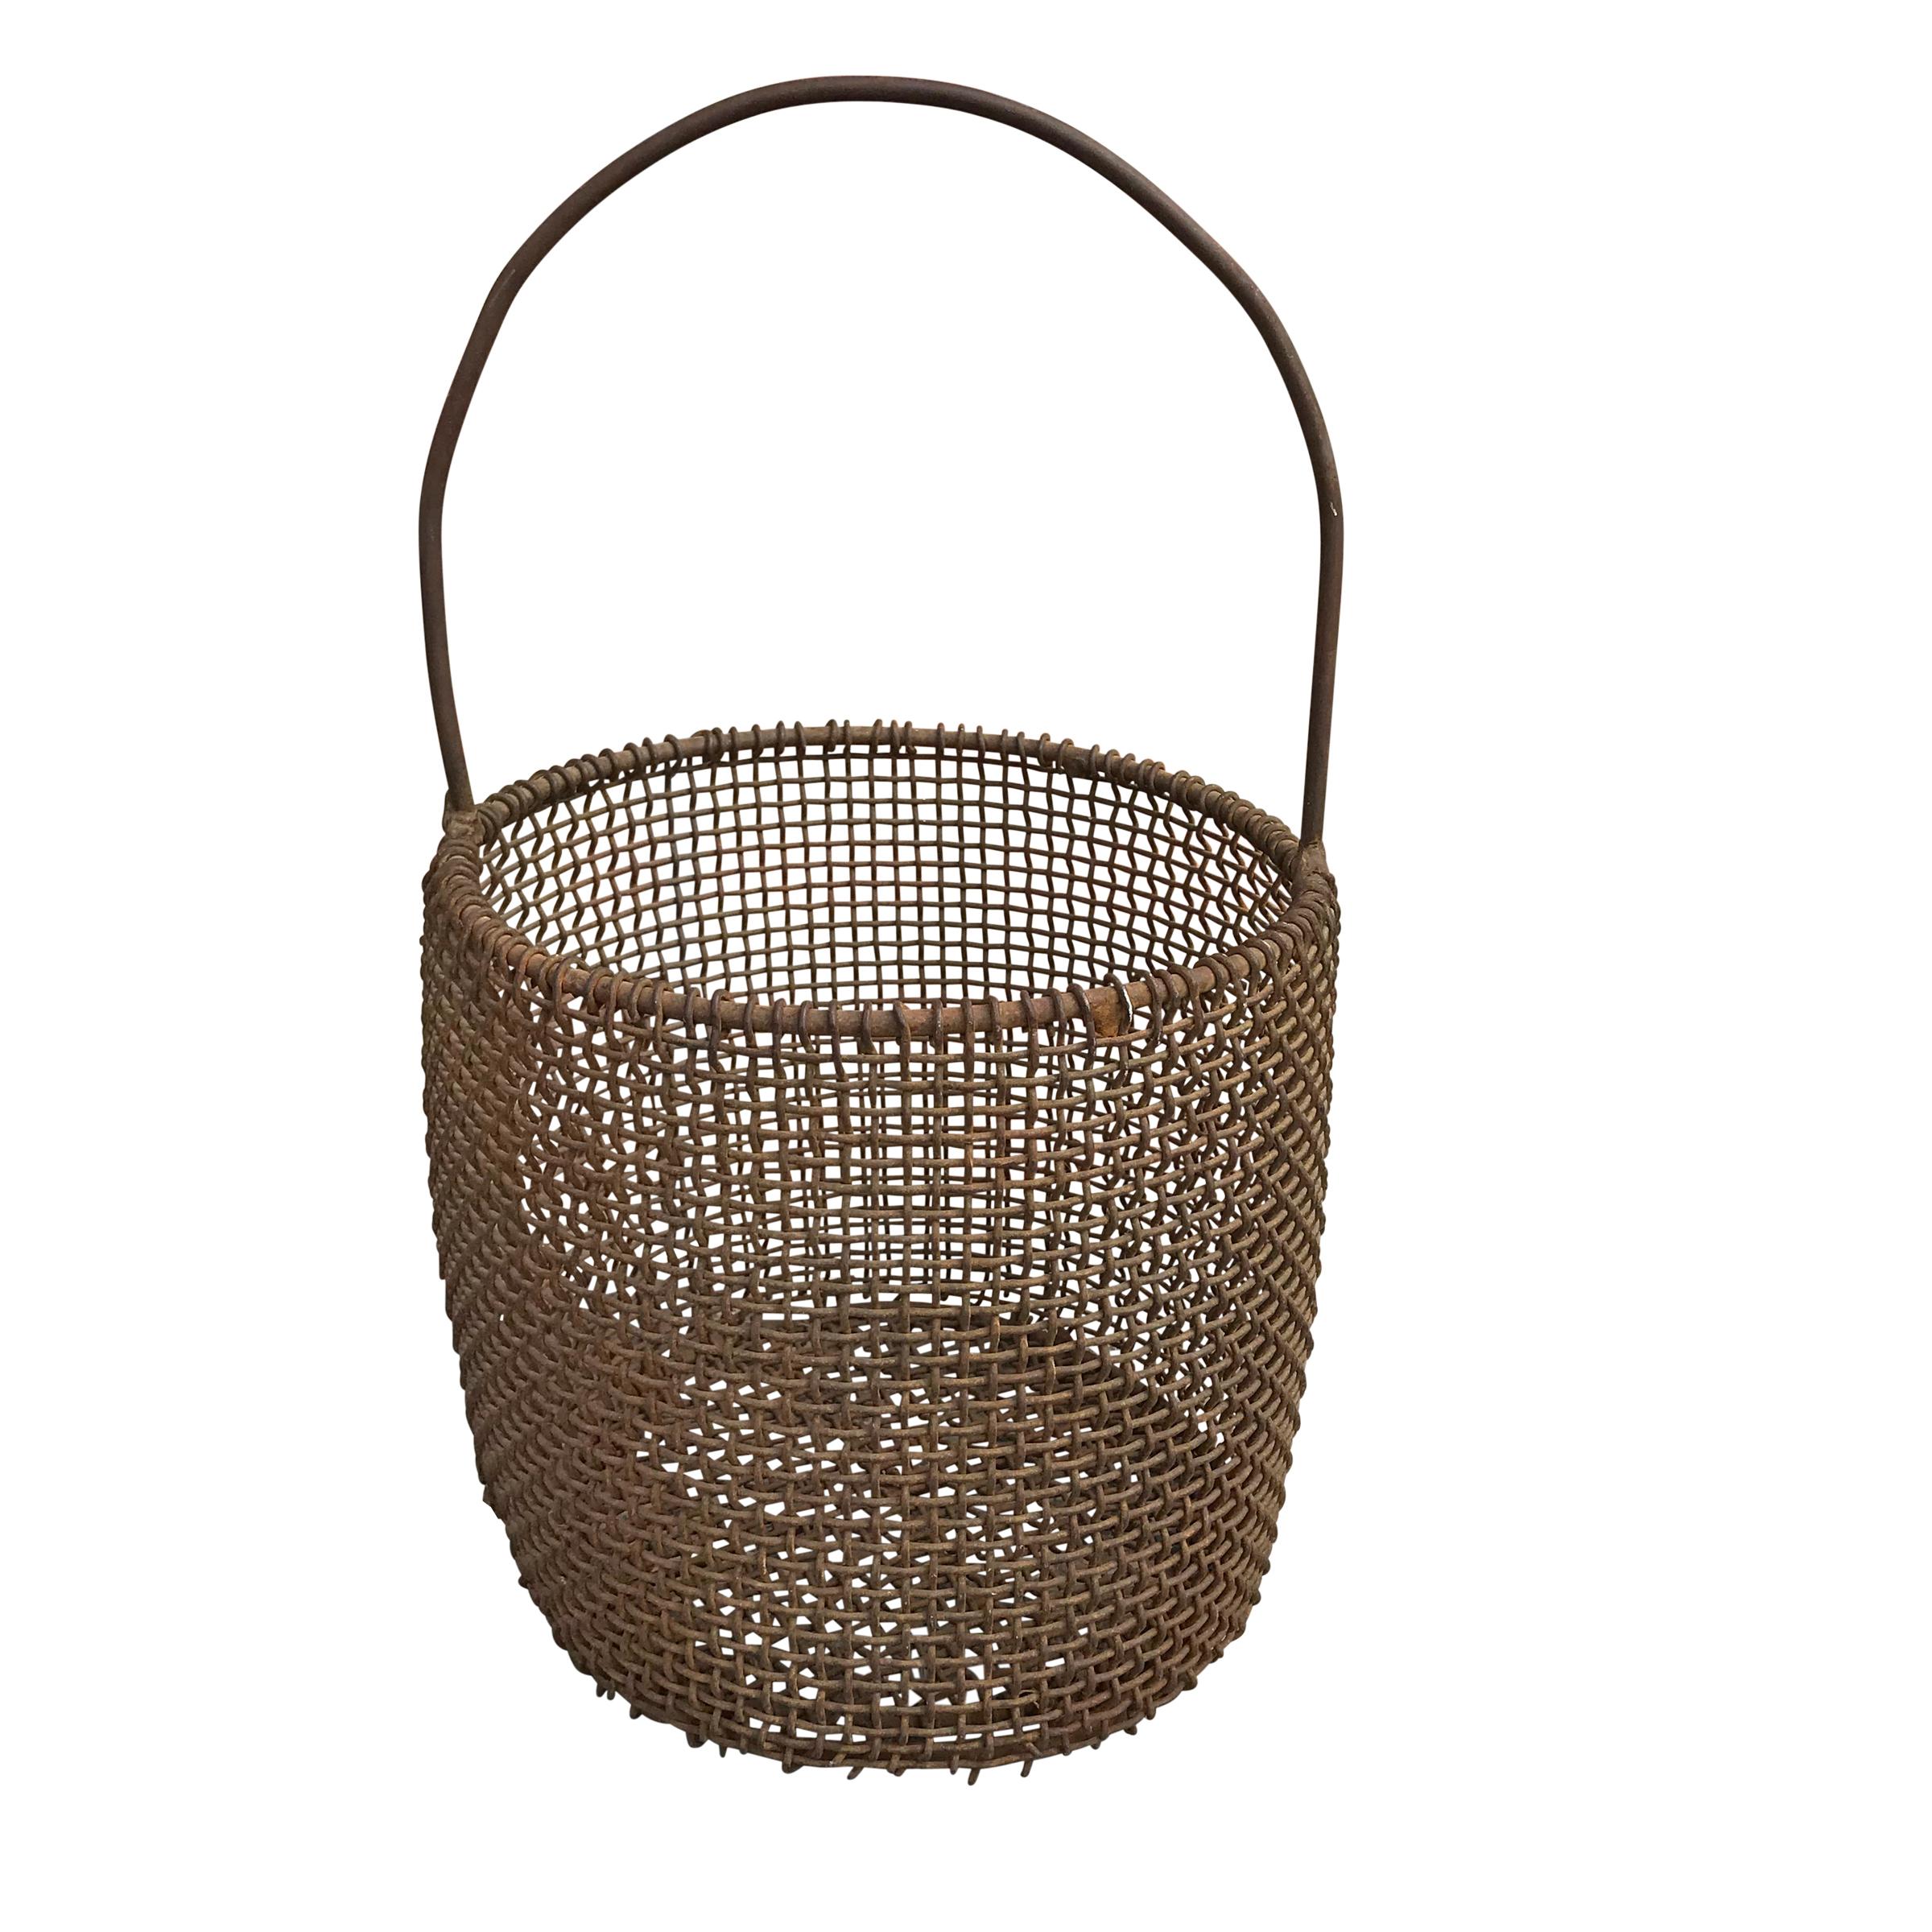 An early 20th century American industrial woven wire mesh basket with a bent iron handle, and a perfectly folksy sculptural form. Would make an excellent firewood basket, or waste bin.